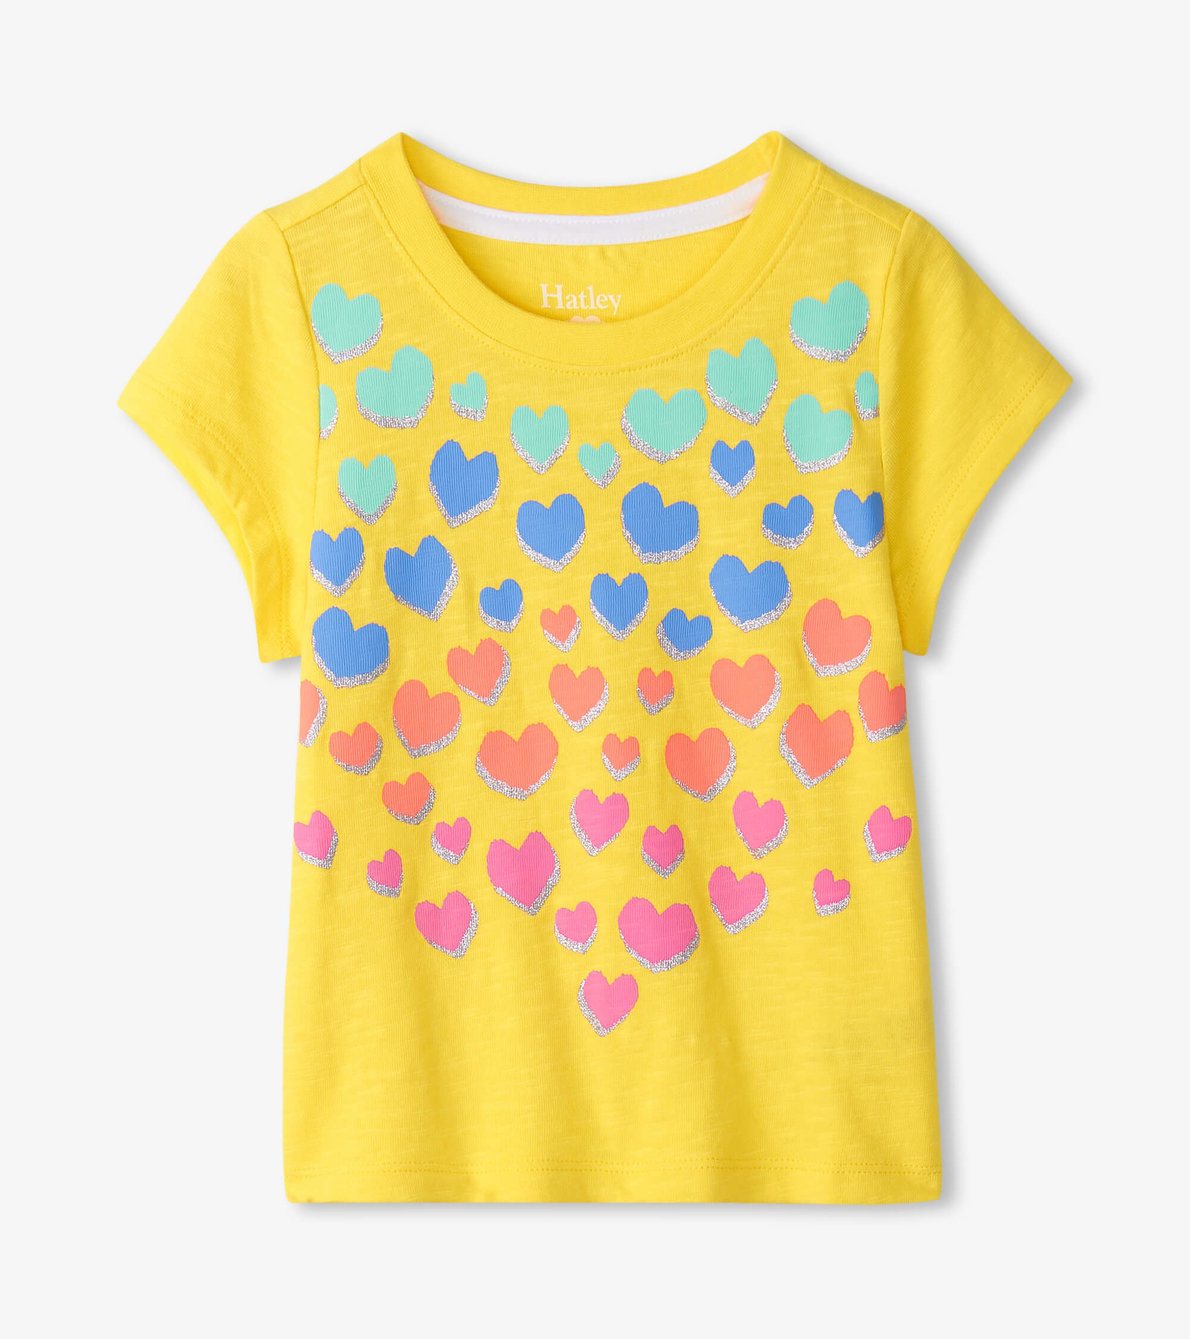 View larger image of Girls Falling Hearts Graphic Tee